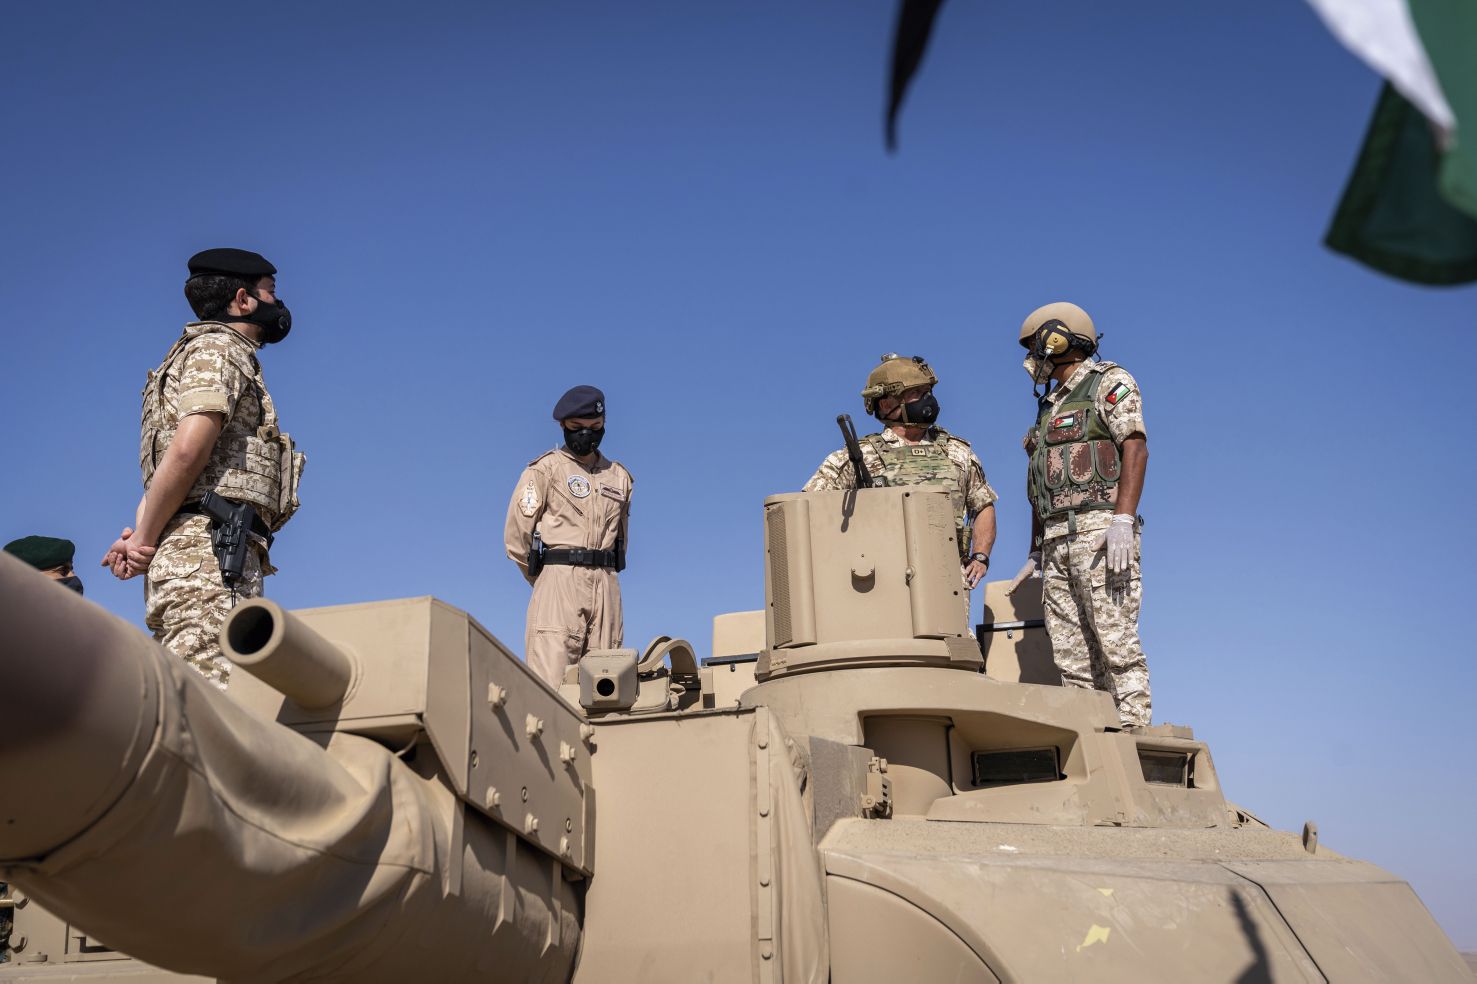 King Abdullah II (centre with helmet), Prince Hussein (left), and Princess Salma (between the two) inspect a Leclerc tank during Exercise ‘Salah al-Din Fortress’. (Royal Hashemite Court)